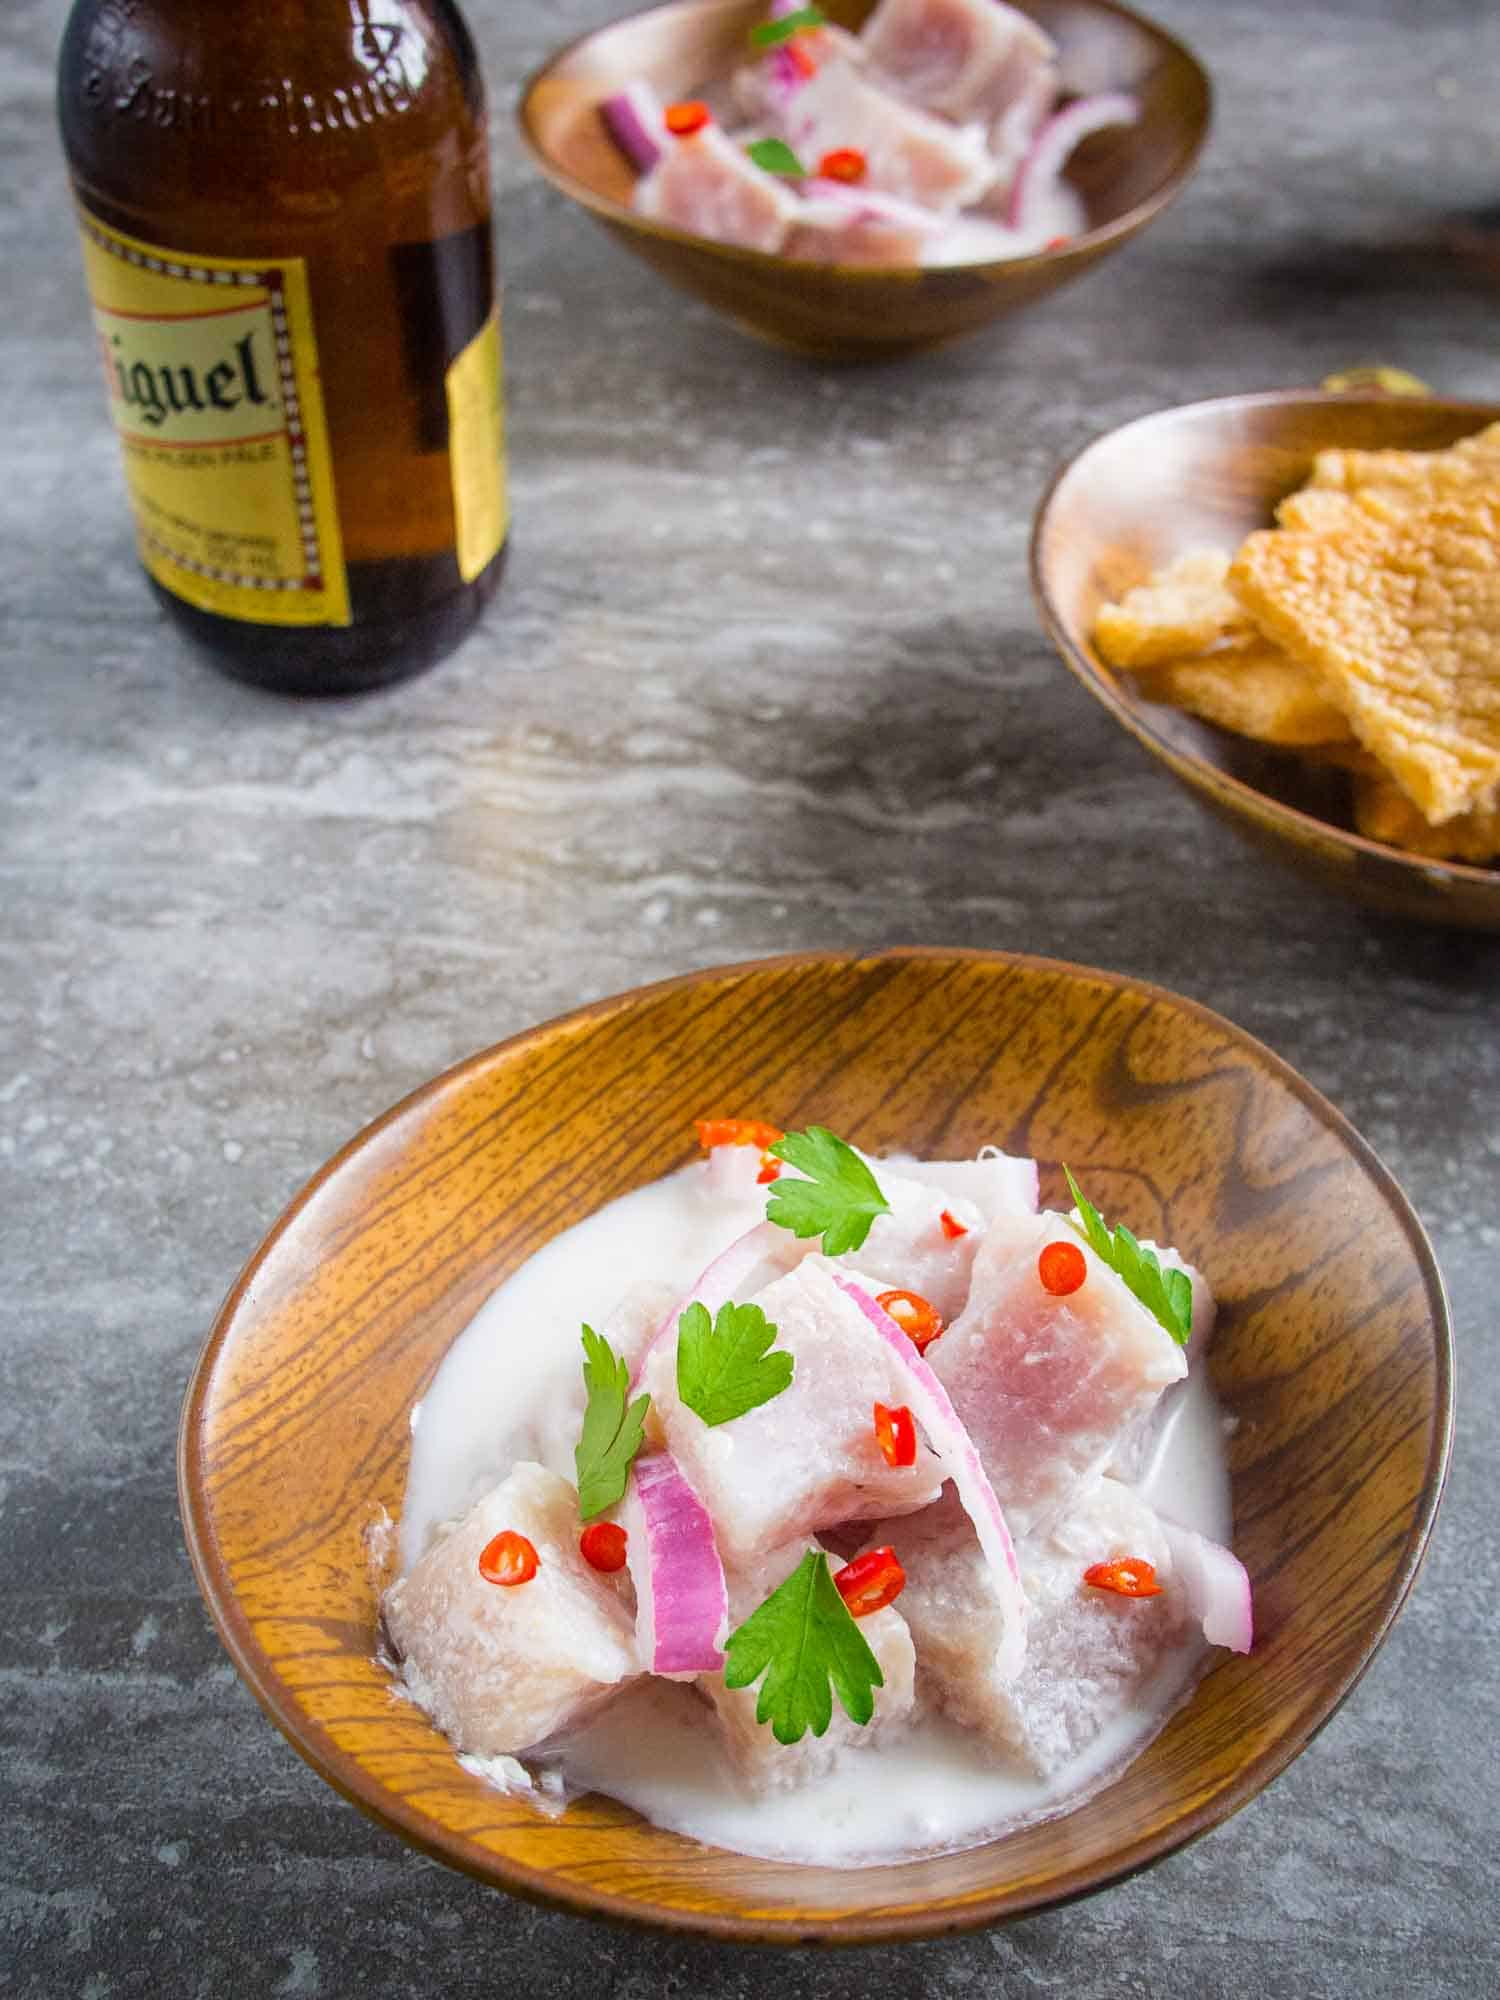 Kinilaw is a common Filipino food similar to ceviche. It is in a pork on a table with beer and chicharron served next to it.